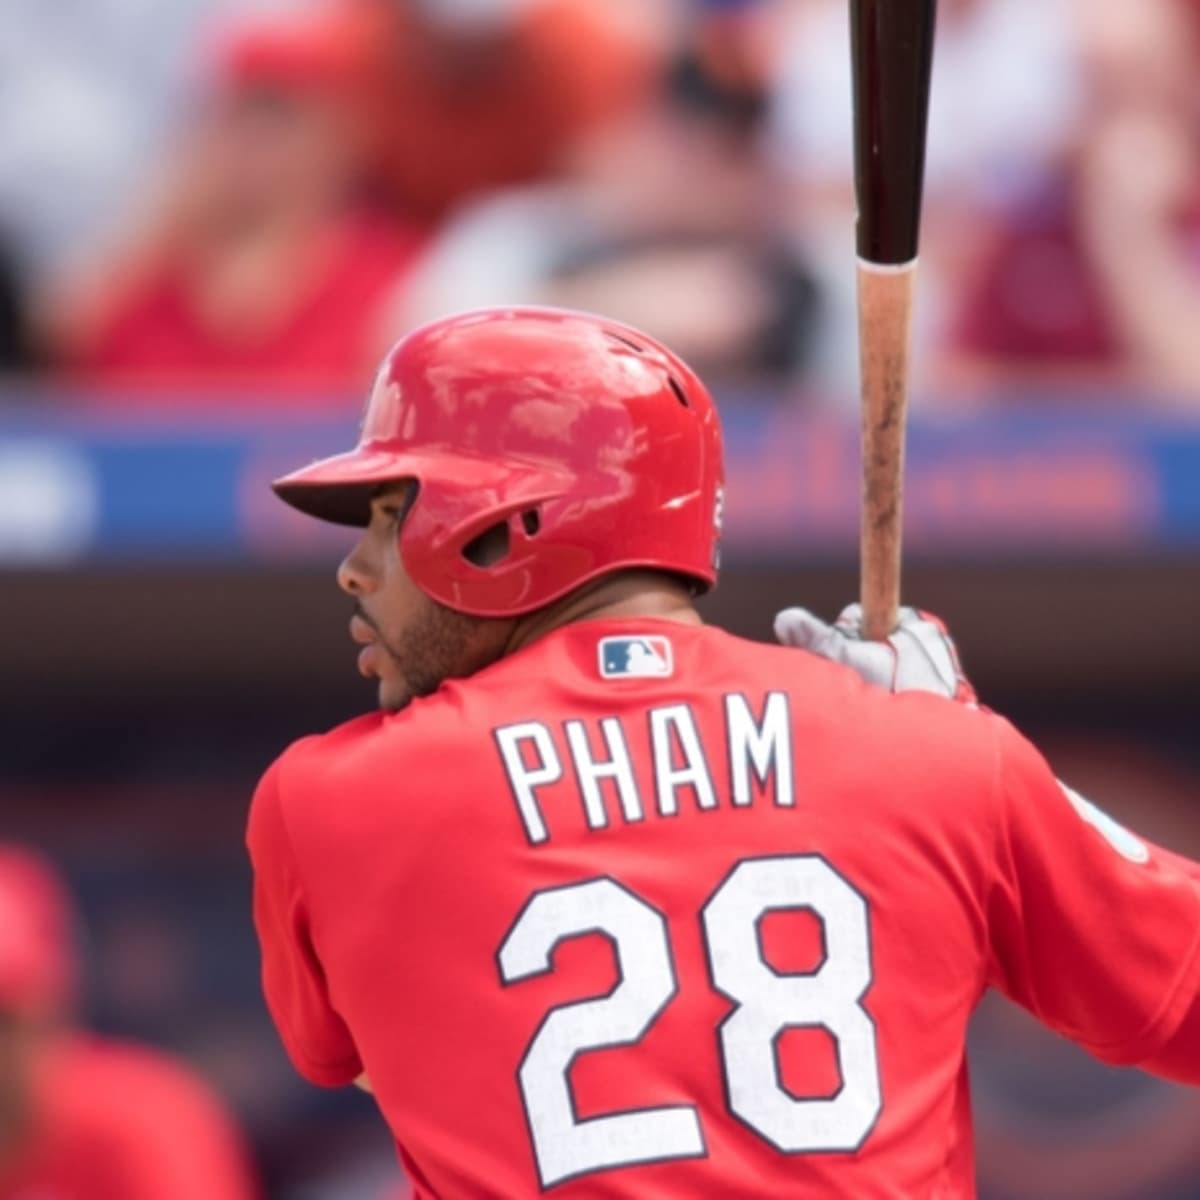 Mets agree to a 1-year, $6 million deal with Tommy Pham for